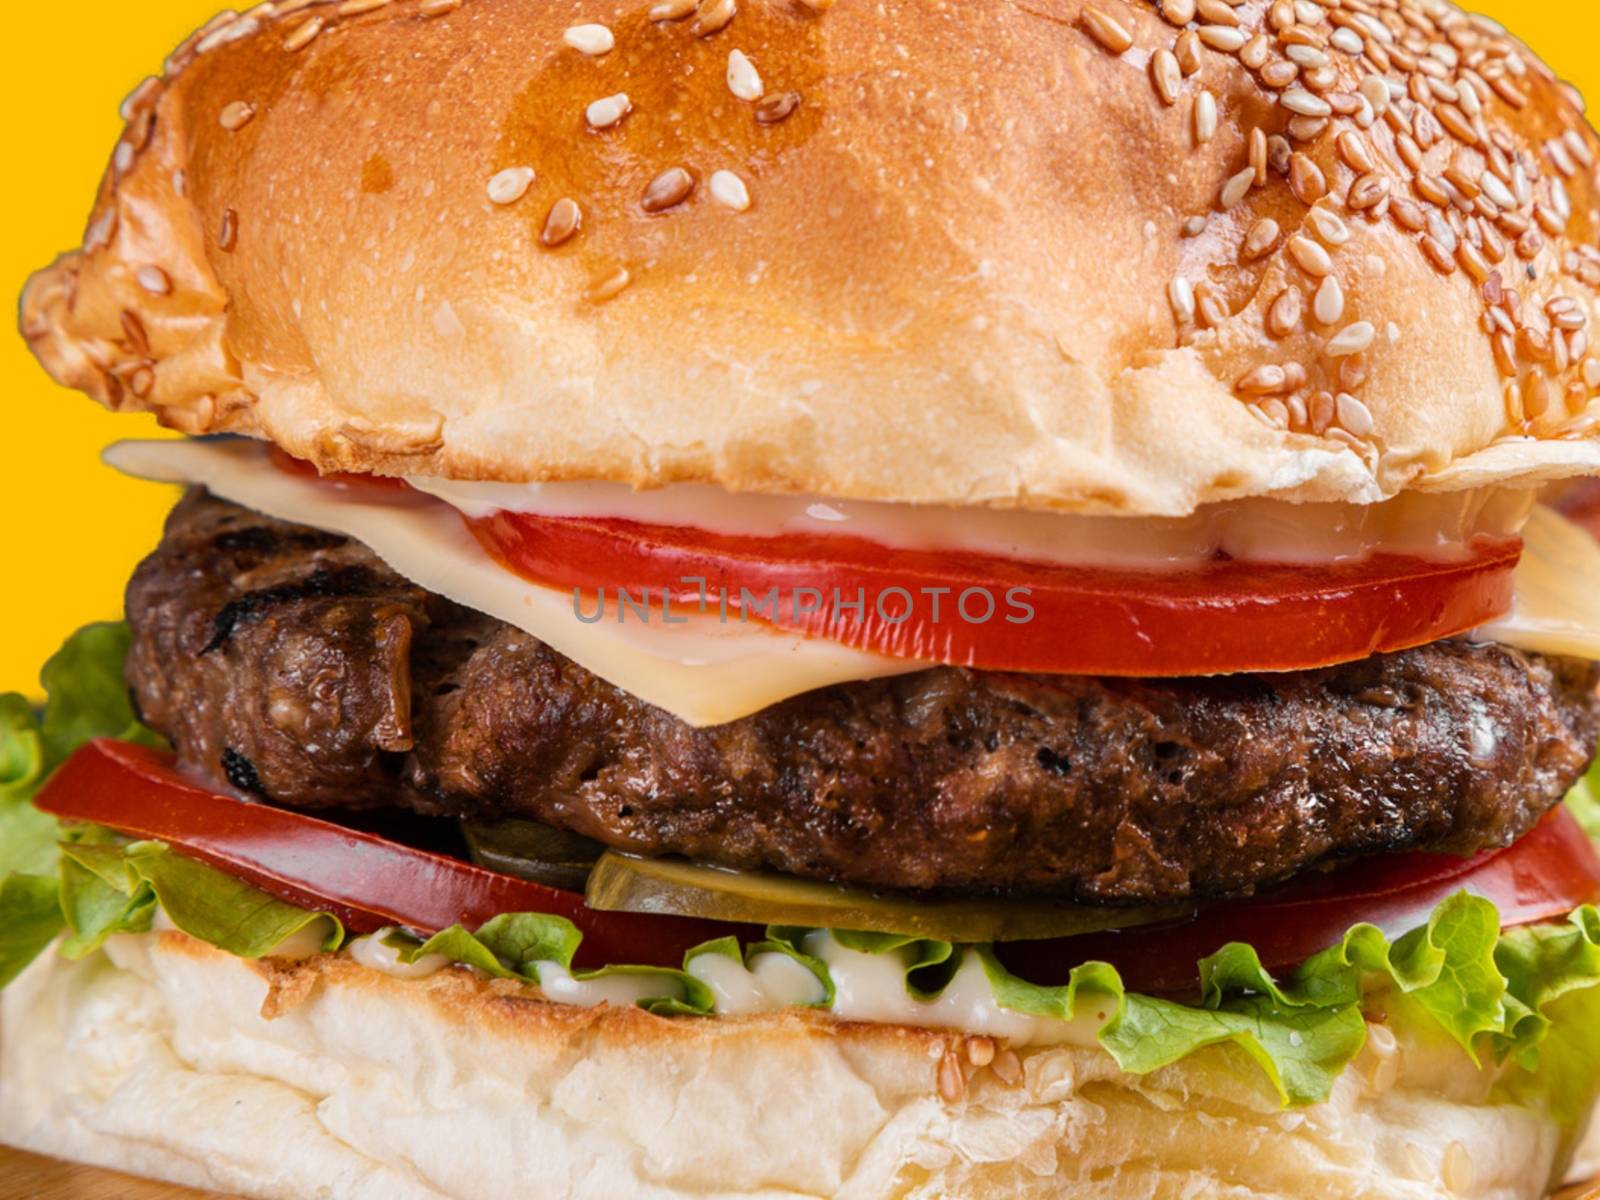 A close up of a delicious hamburger with beef, cheese, and vegetables by balage941